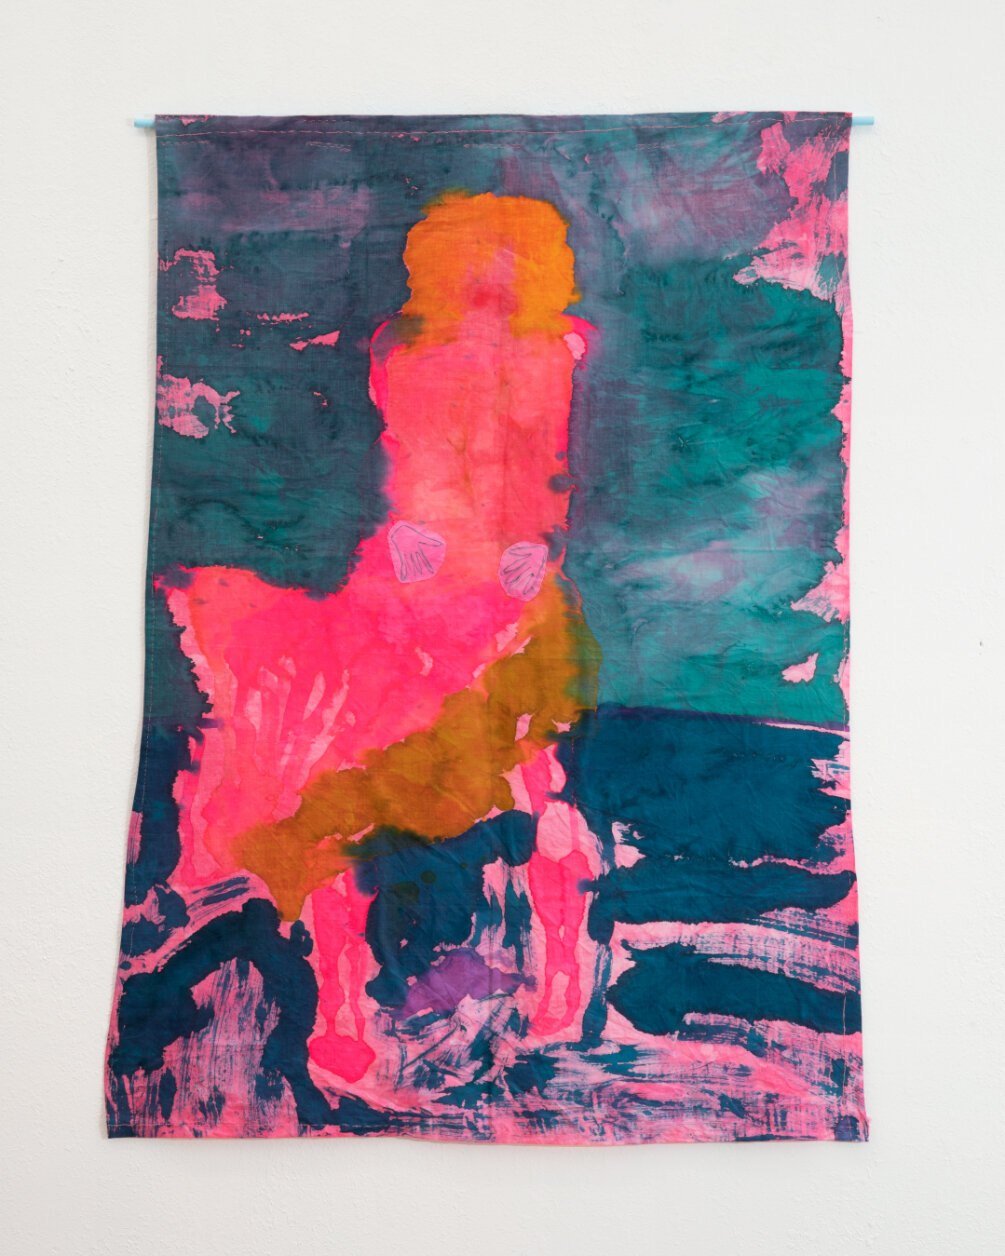  JENNIFER SULLIVAN  Pink Courtney Versace Ad , 2021 38 x 28 in (96.52 x 71.12 cm) Dye and thread on hand dyed cotton with painted wooden dowel 